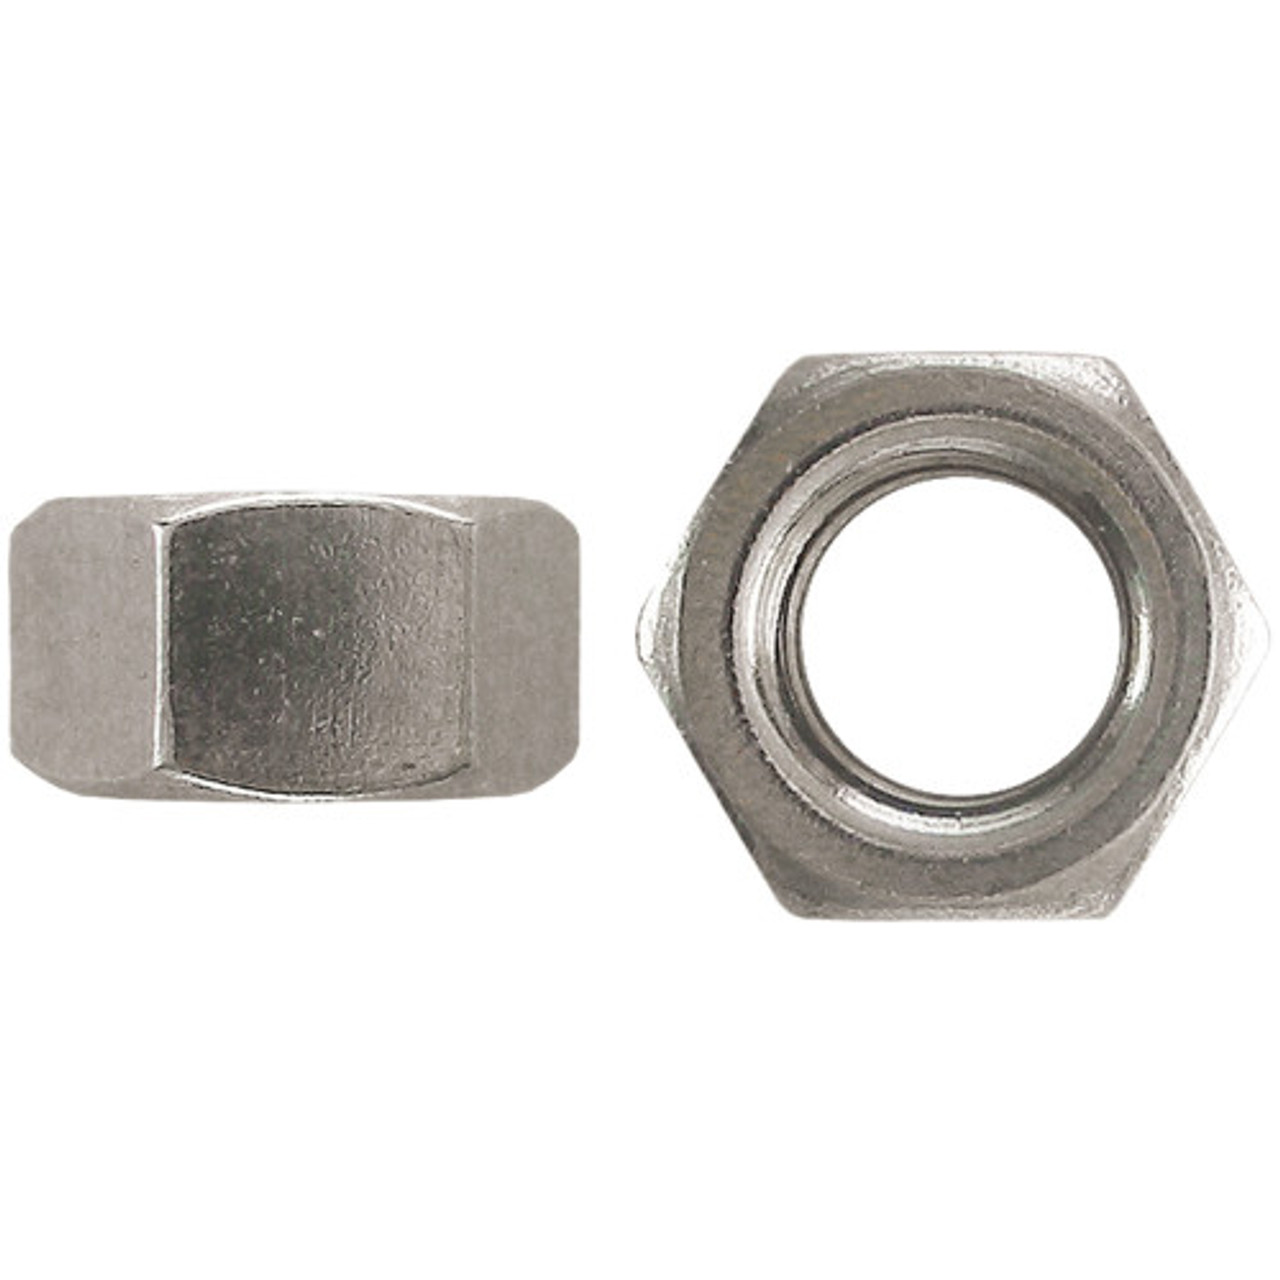 7/16"-14 UNC 316 Stainless Steel Hex Nut 50 Pc.   5226-020